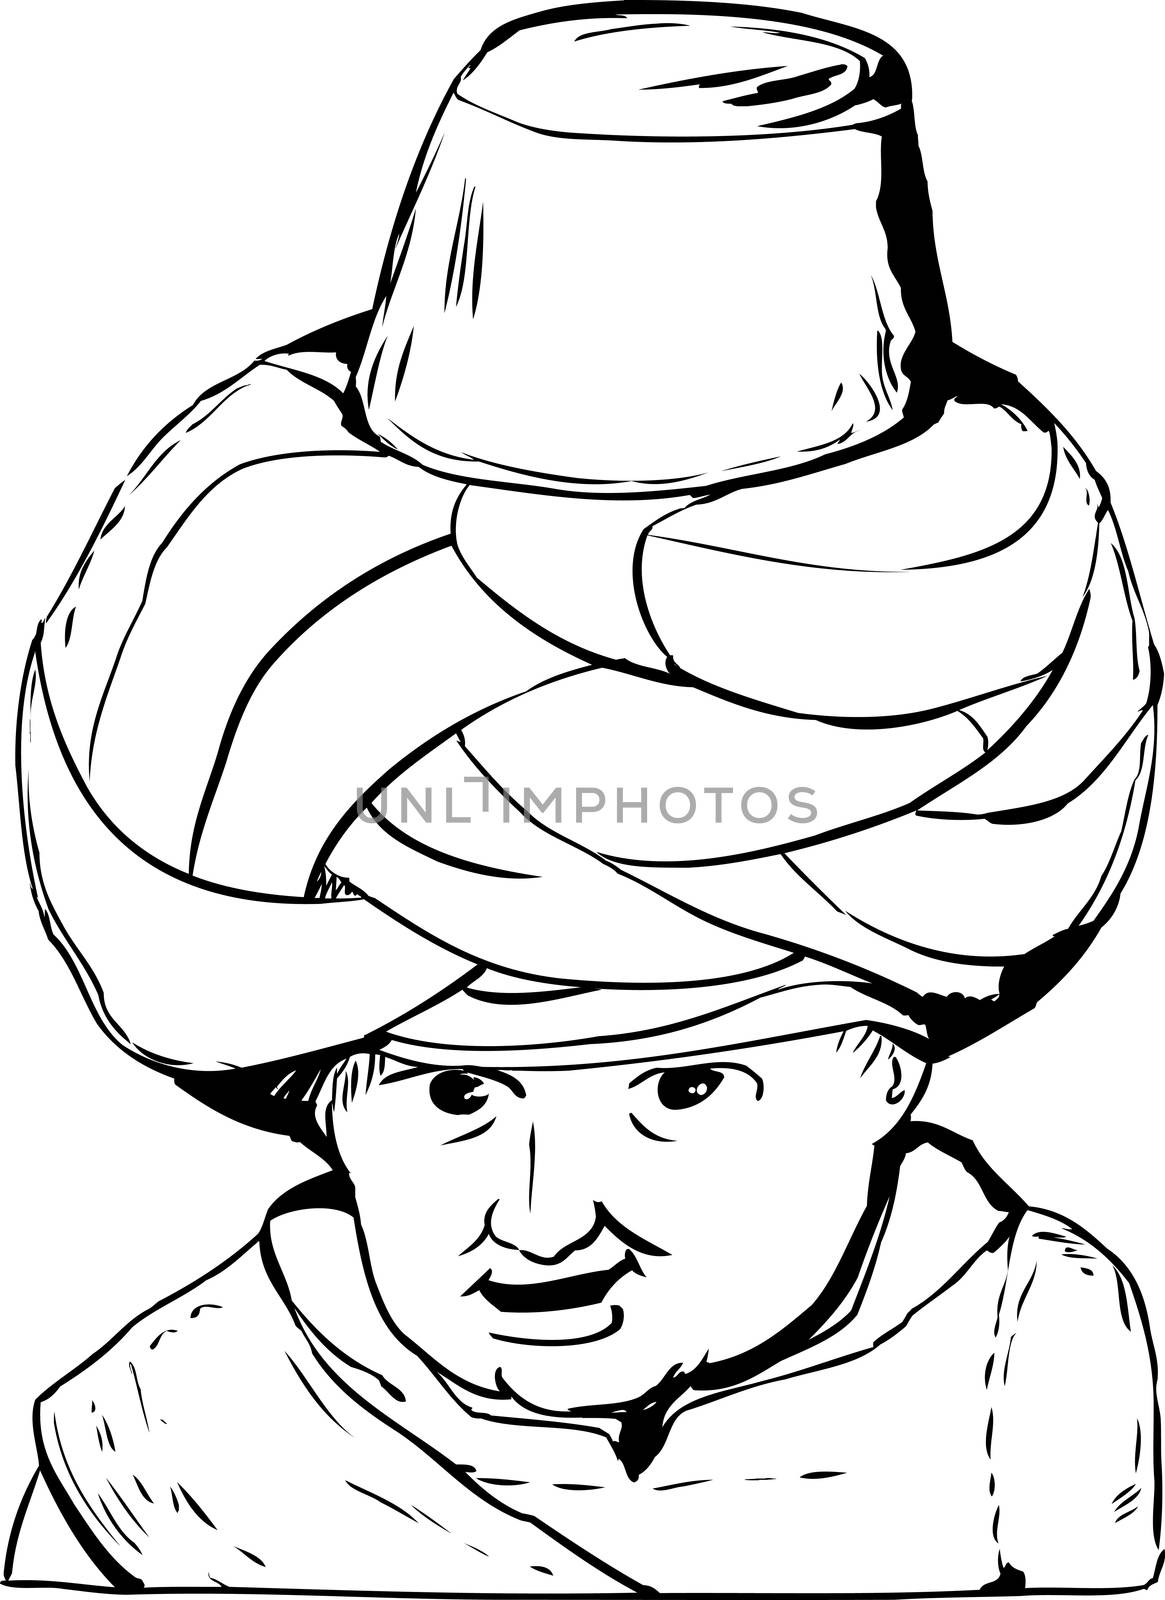 Outline drawing of 18th century Arab doll by TheBlackRhino